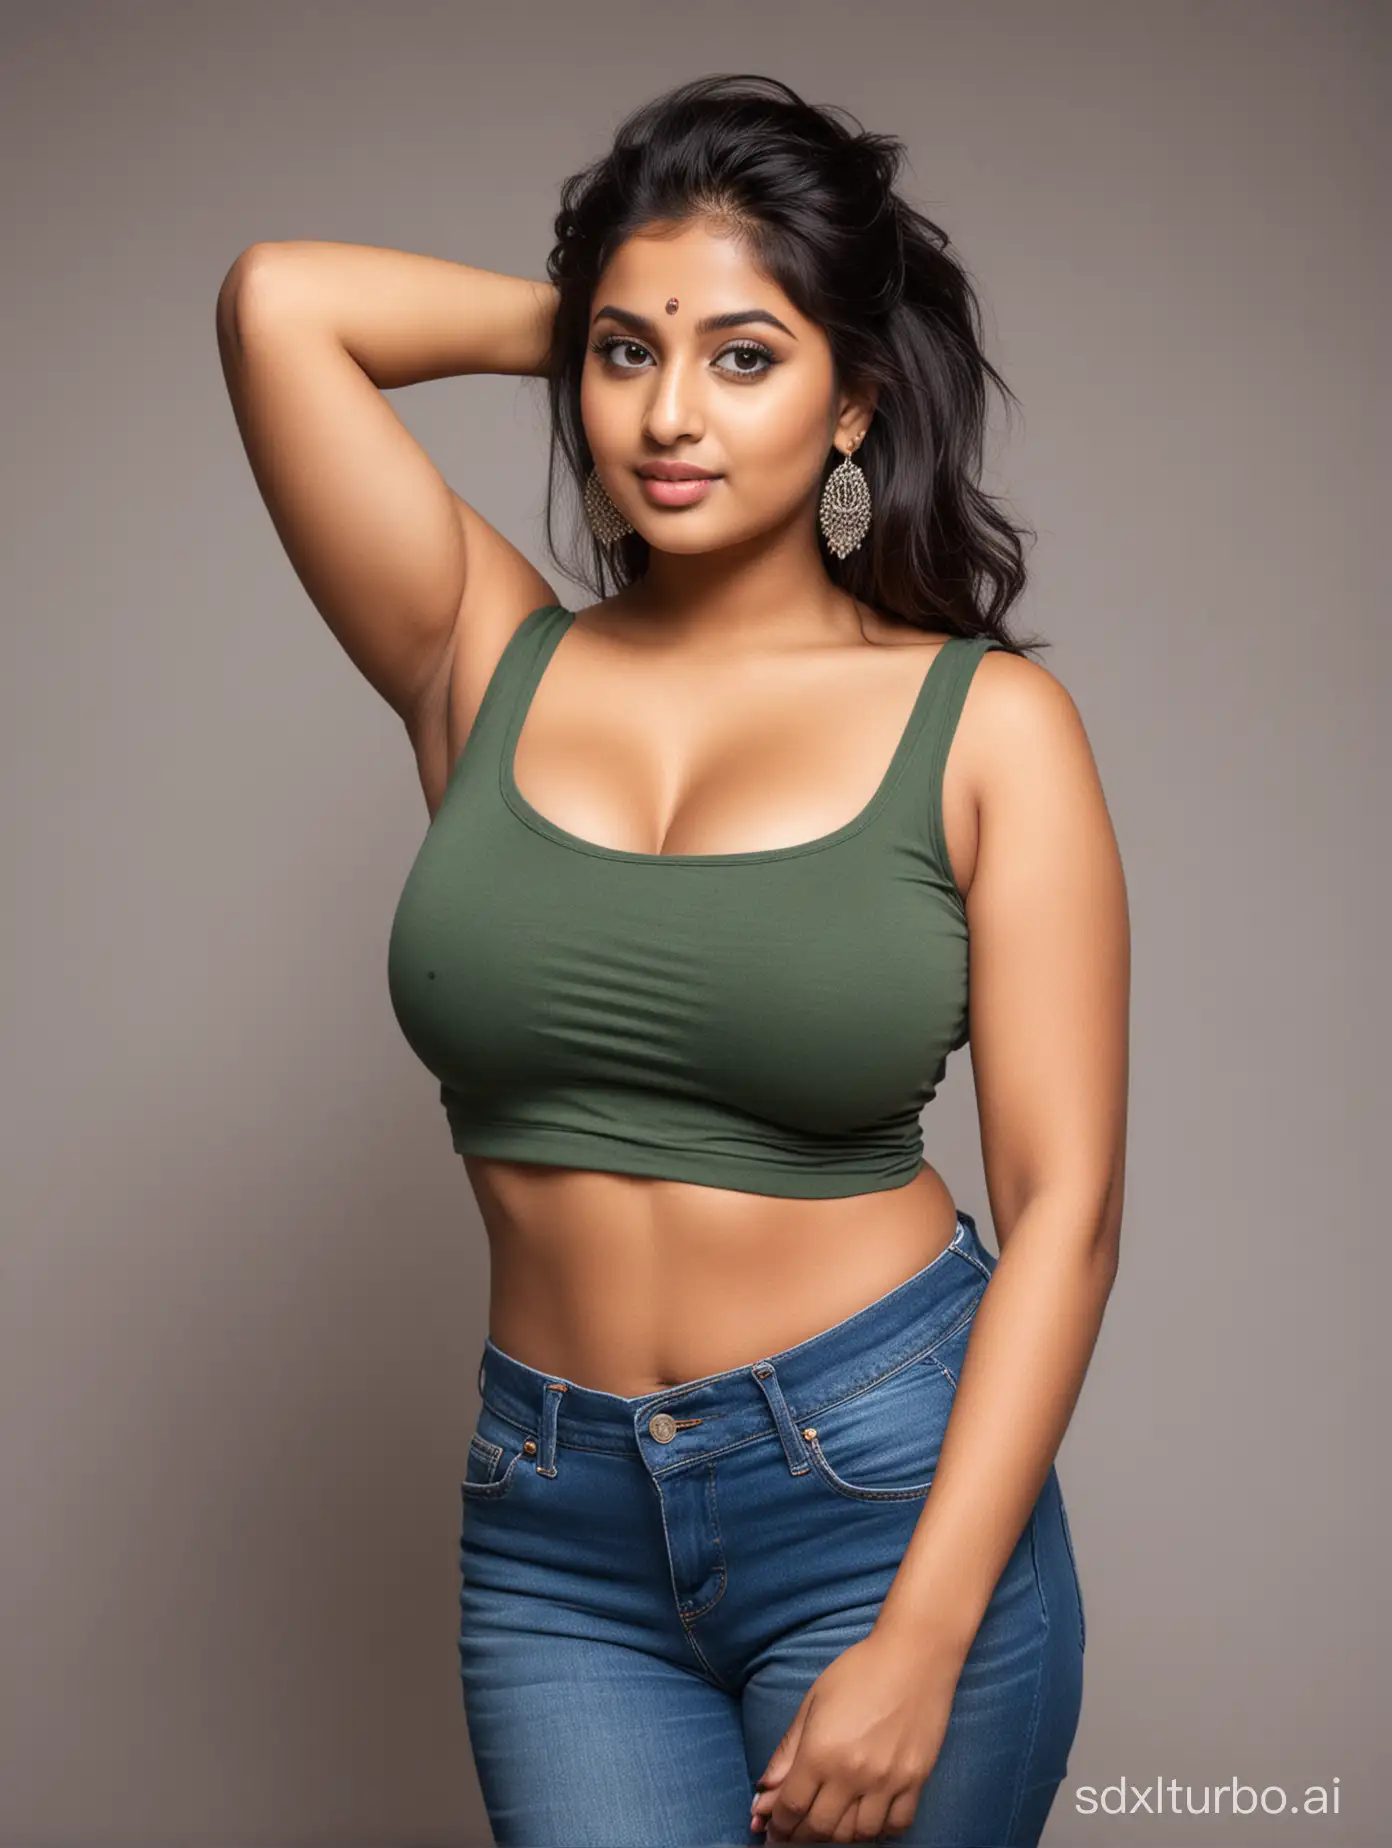 curvy sexy indian girl with large boobs, wearing a crop top